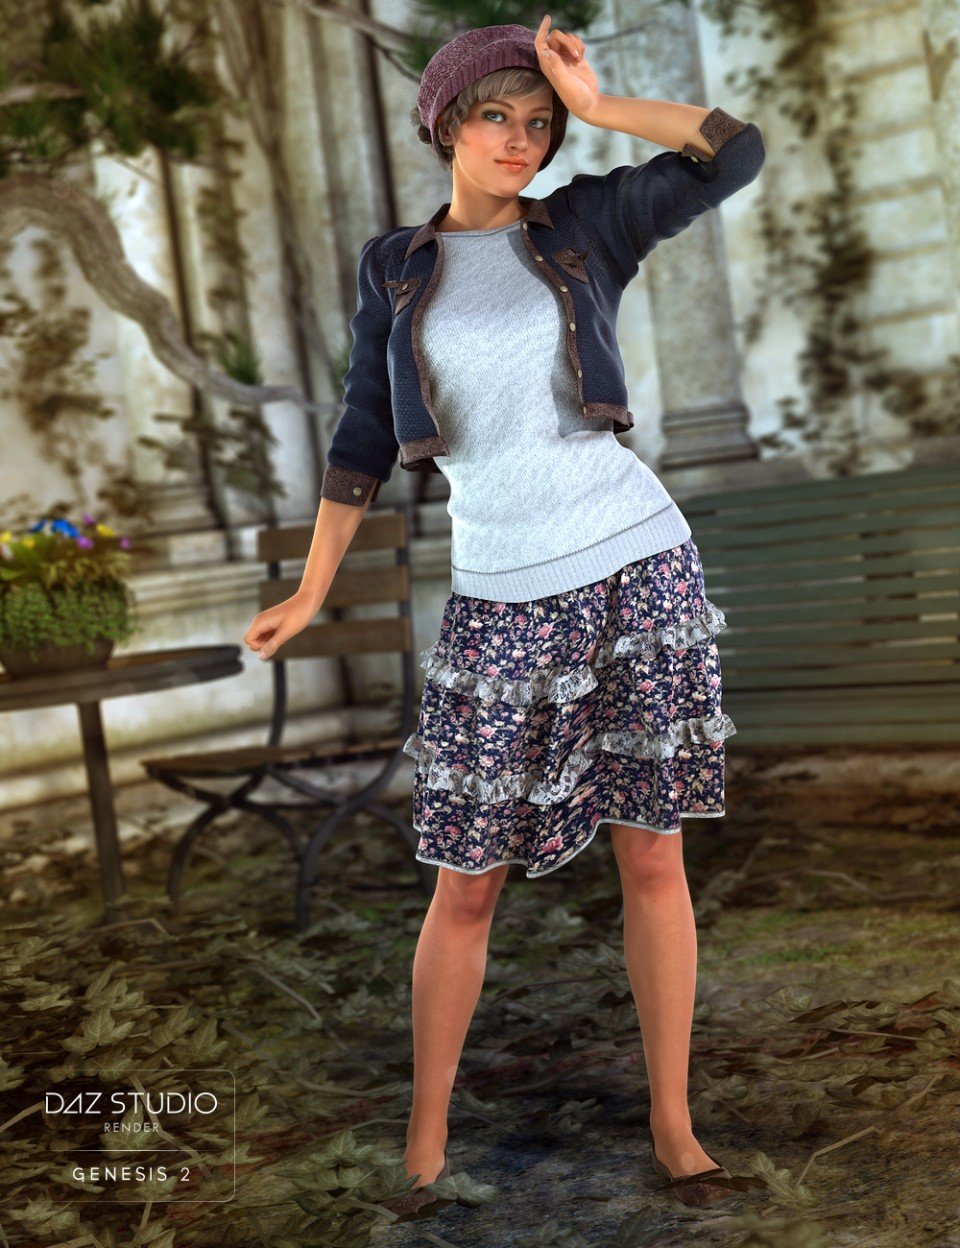 Smells Like Fall for Genesis 2 Female(s) + Textures_DAZ3D下载站